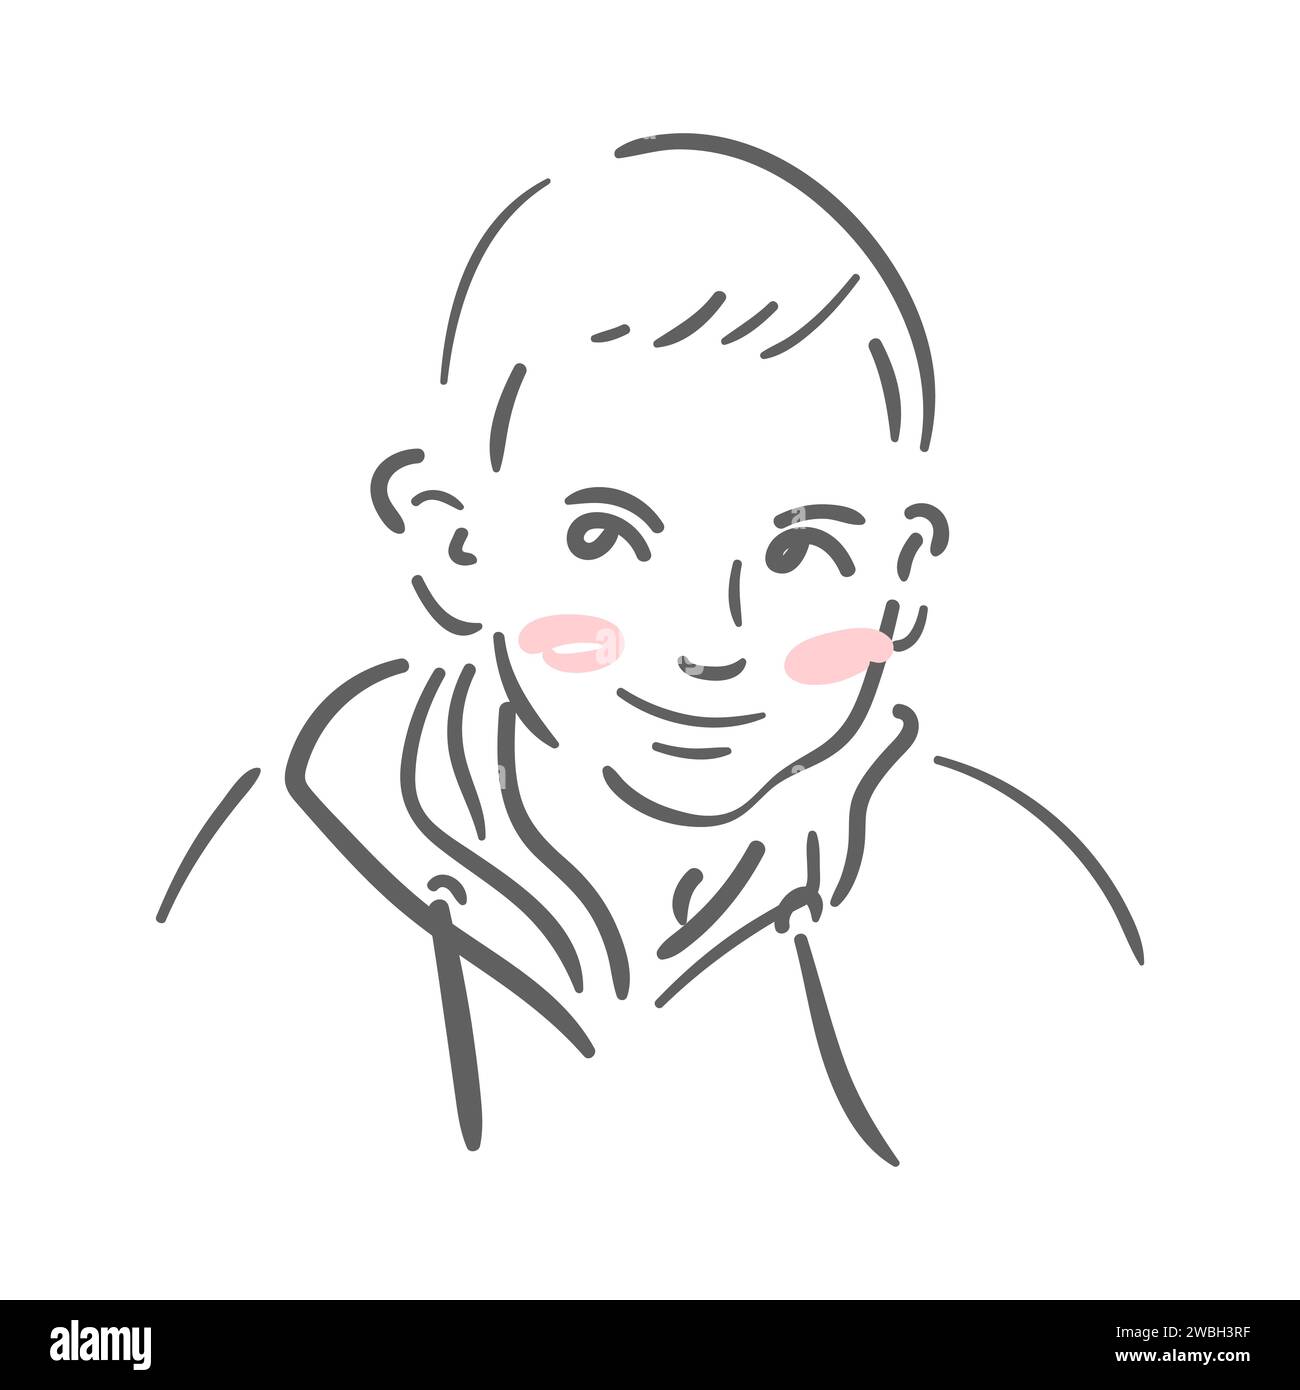 Cute baby boy in a hoodie. Minimalistic hand drawn illustration in sketch style. For posters, postcards, banners, design Stock Vector